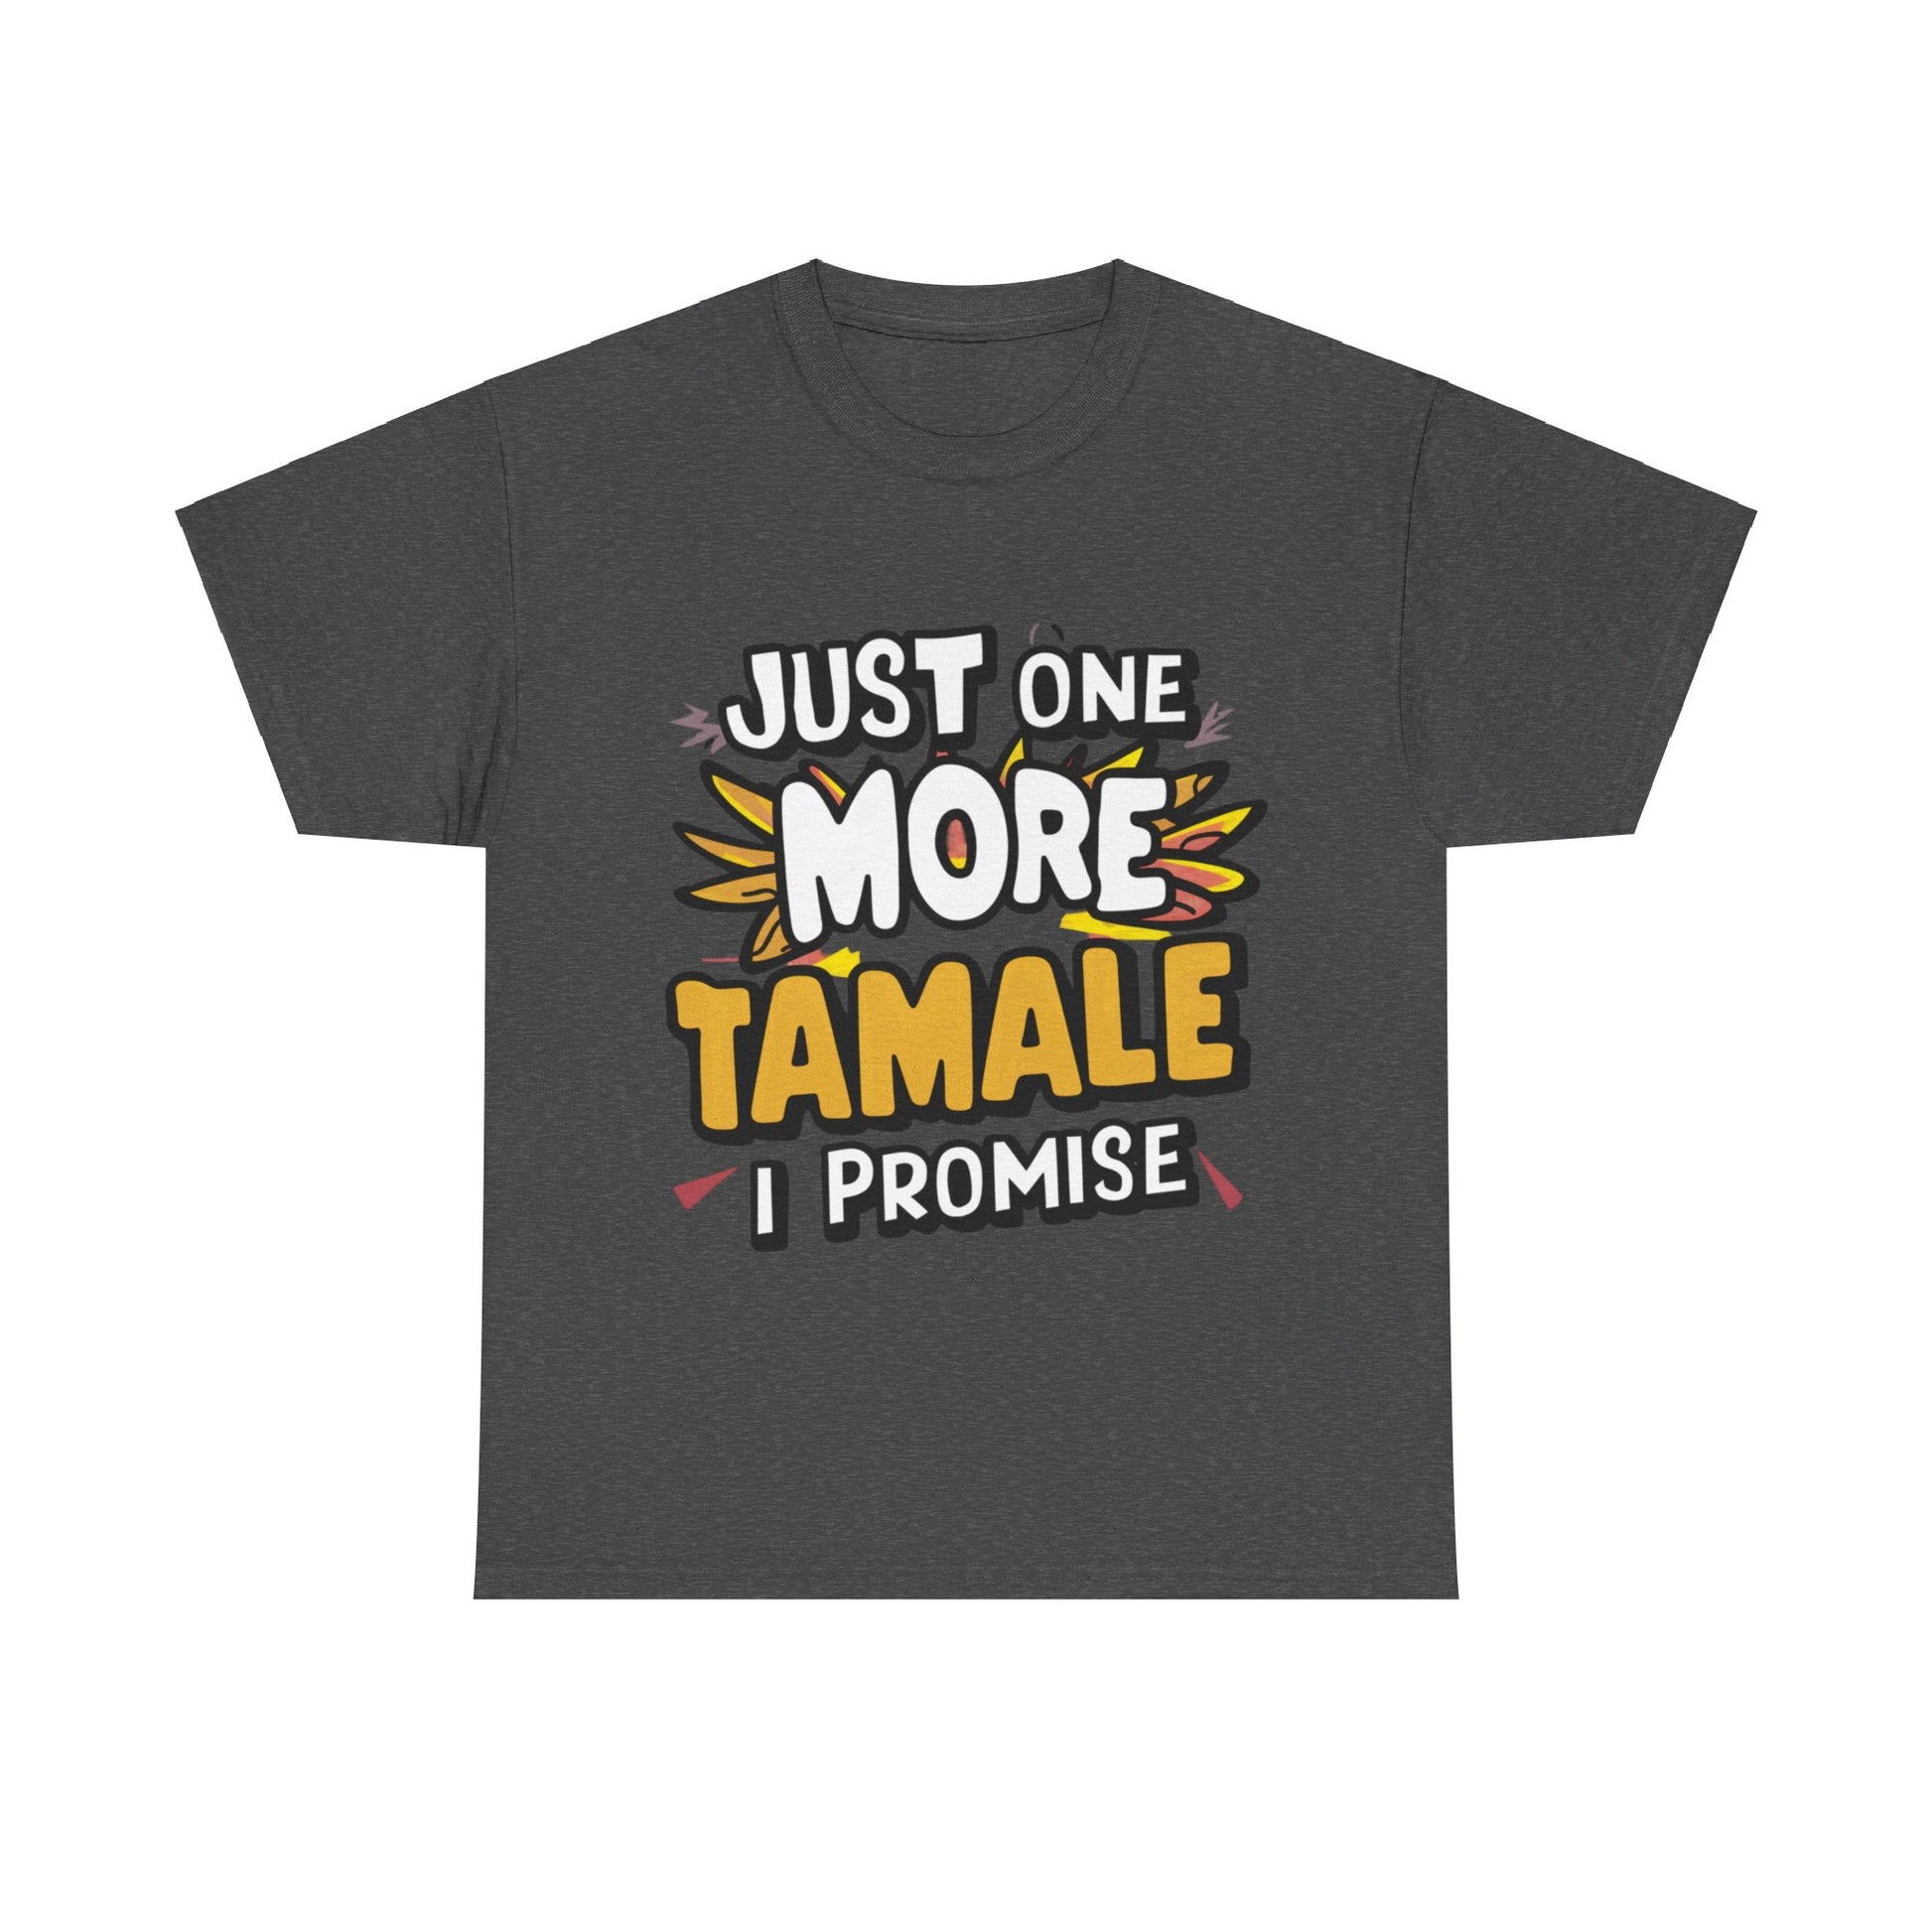 Just One More Tamale I Promise Mexican Food Graphic Unisex Heavy Cotton Tee Cotton Funny Humorous Graphic Soft Premium Unisex Men Women Dark Heather T-shirt Birthday Gift-4